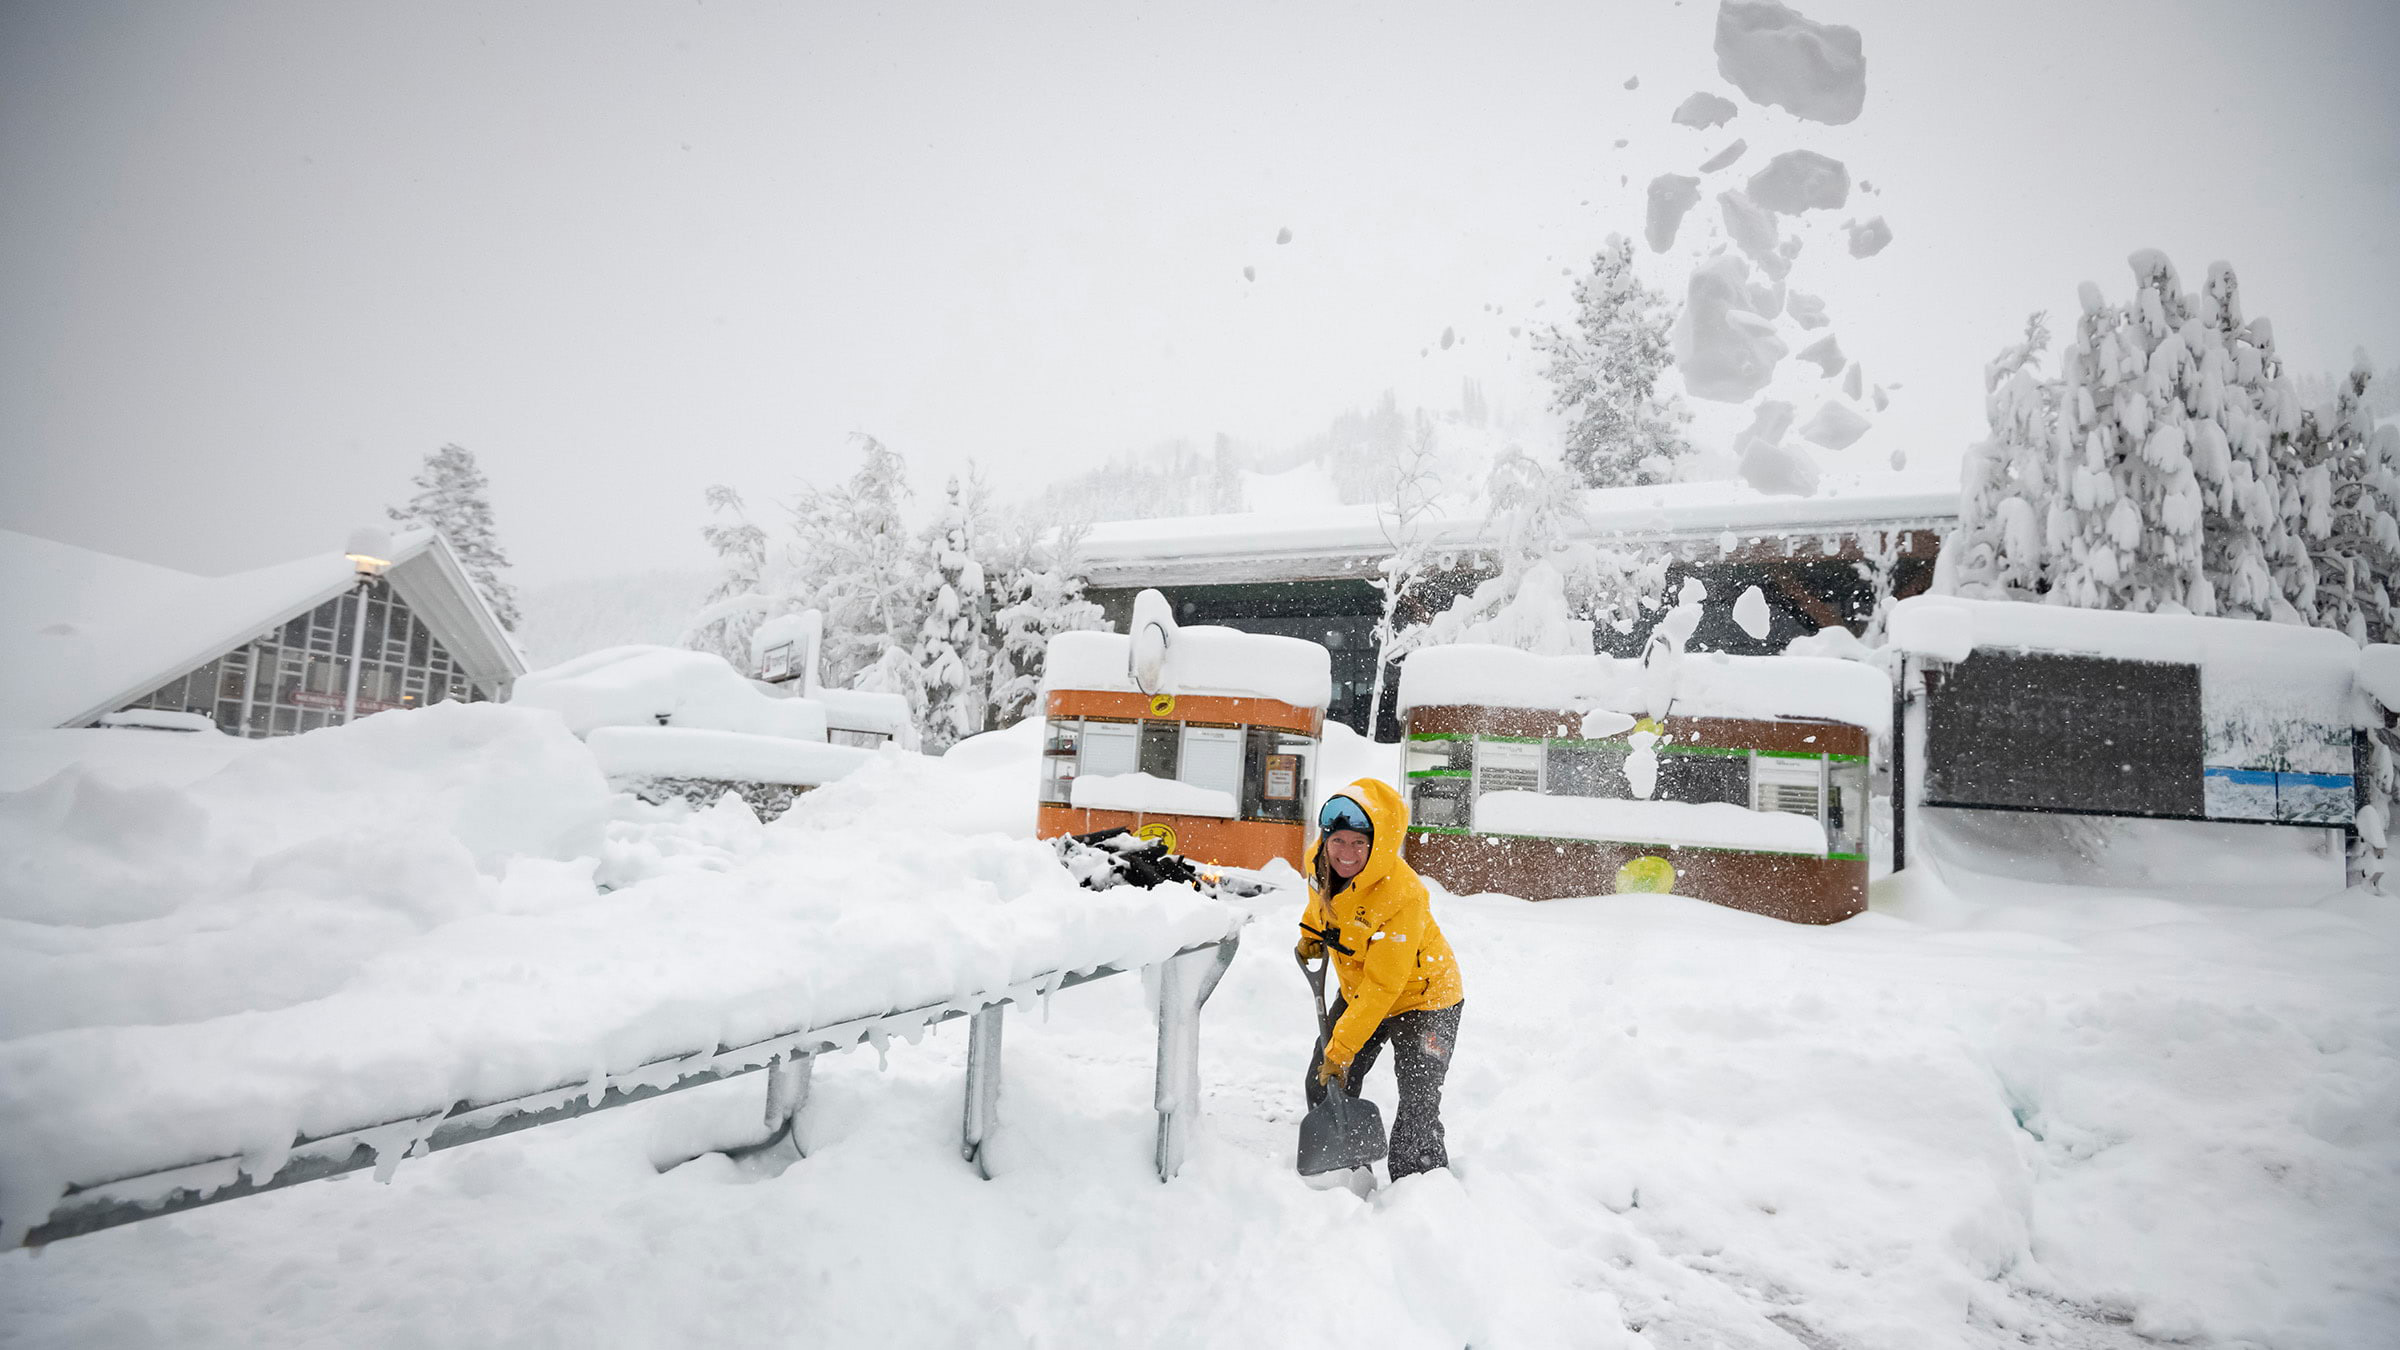 Palisades Tahoe Mountain Host shoveling snow during at 5+ foot storm in December 2021